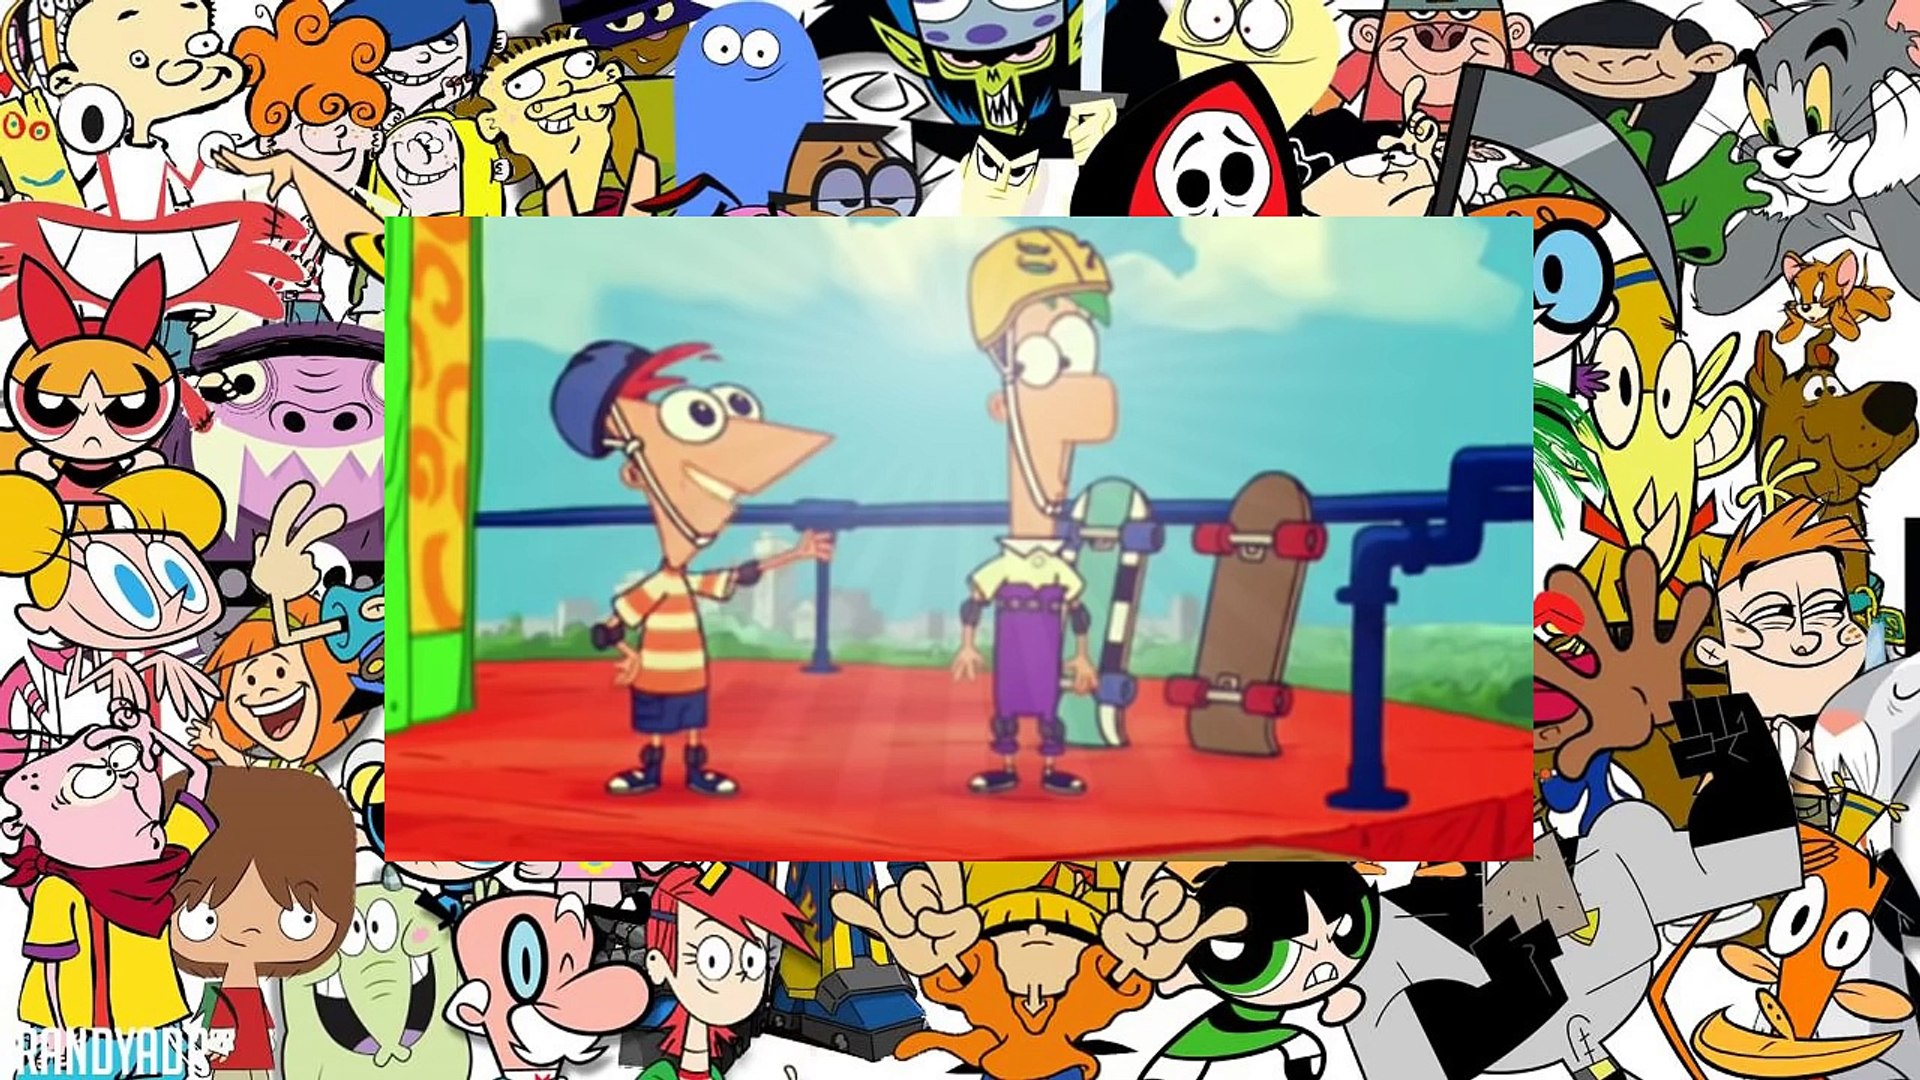 Phineas and Ferb S3E117 Phineas Birthday Clip O Rama! - Dailymotion Video